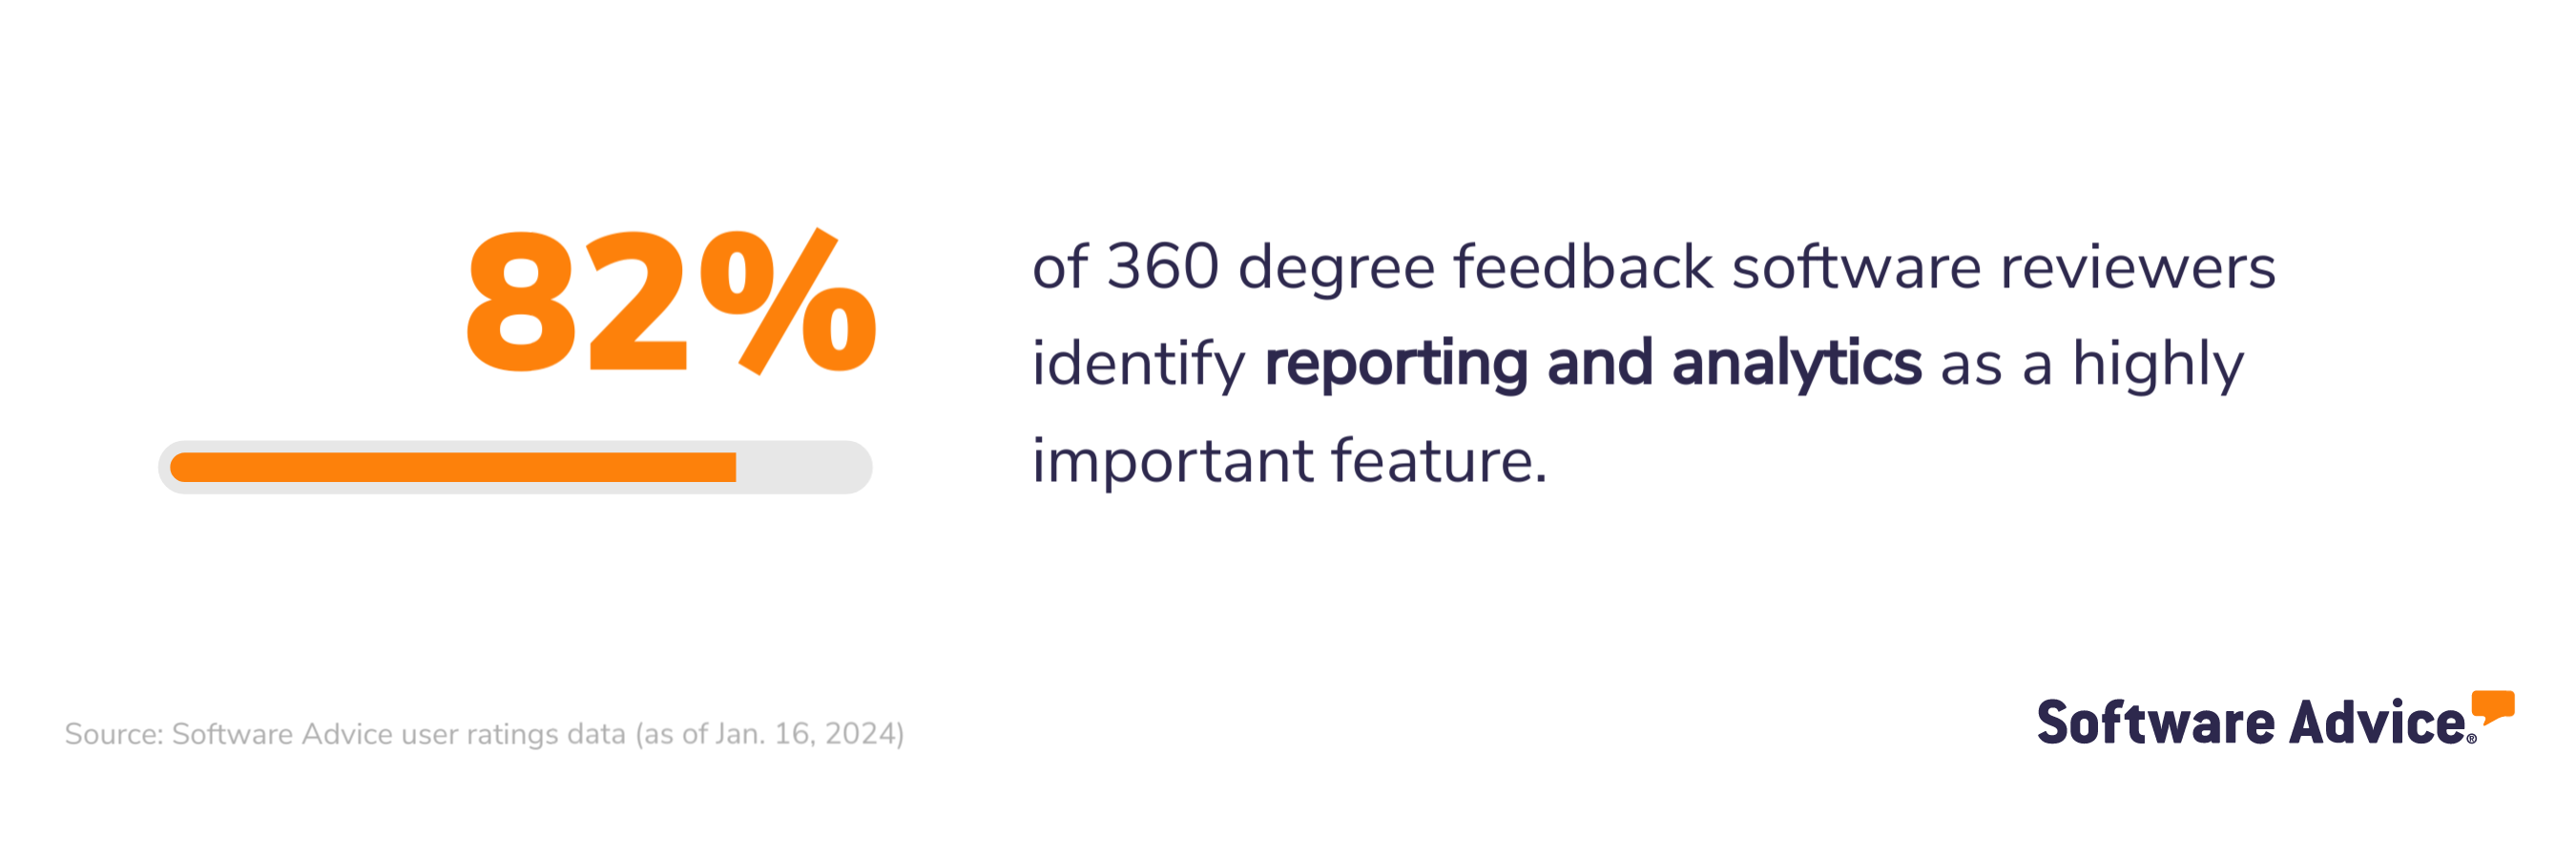 SA graphic: 82% of 360 degree feedback software reviewers identify reporting and analytics as a highly important feature